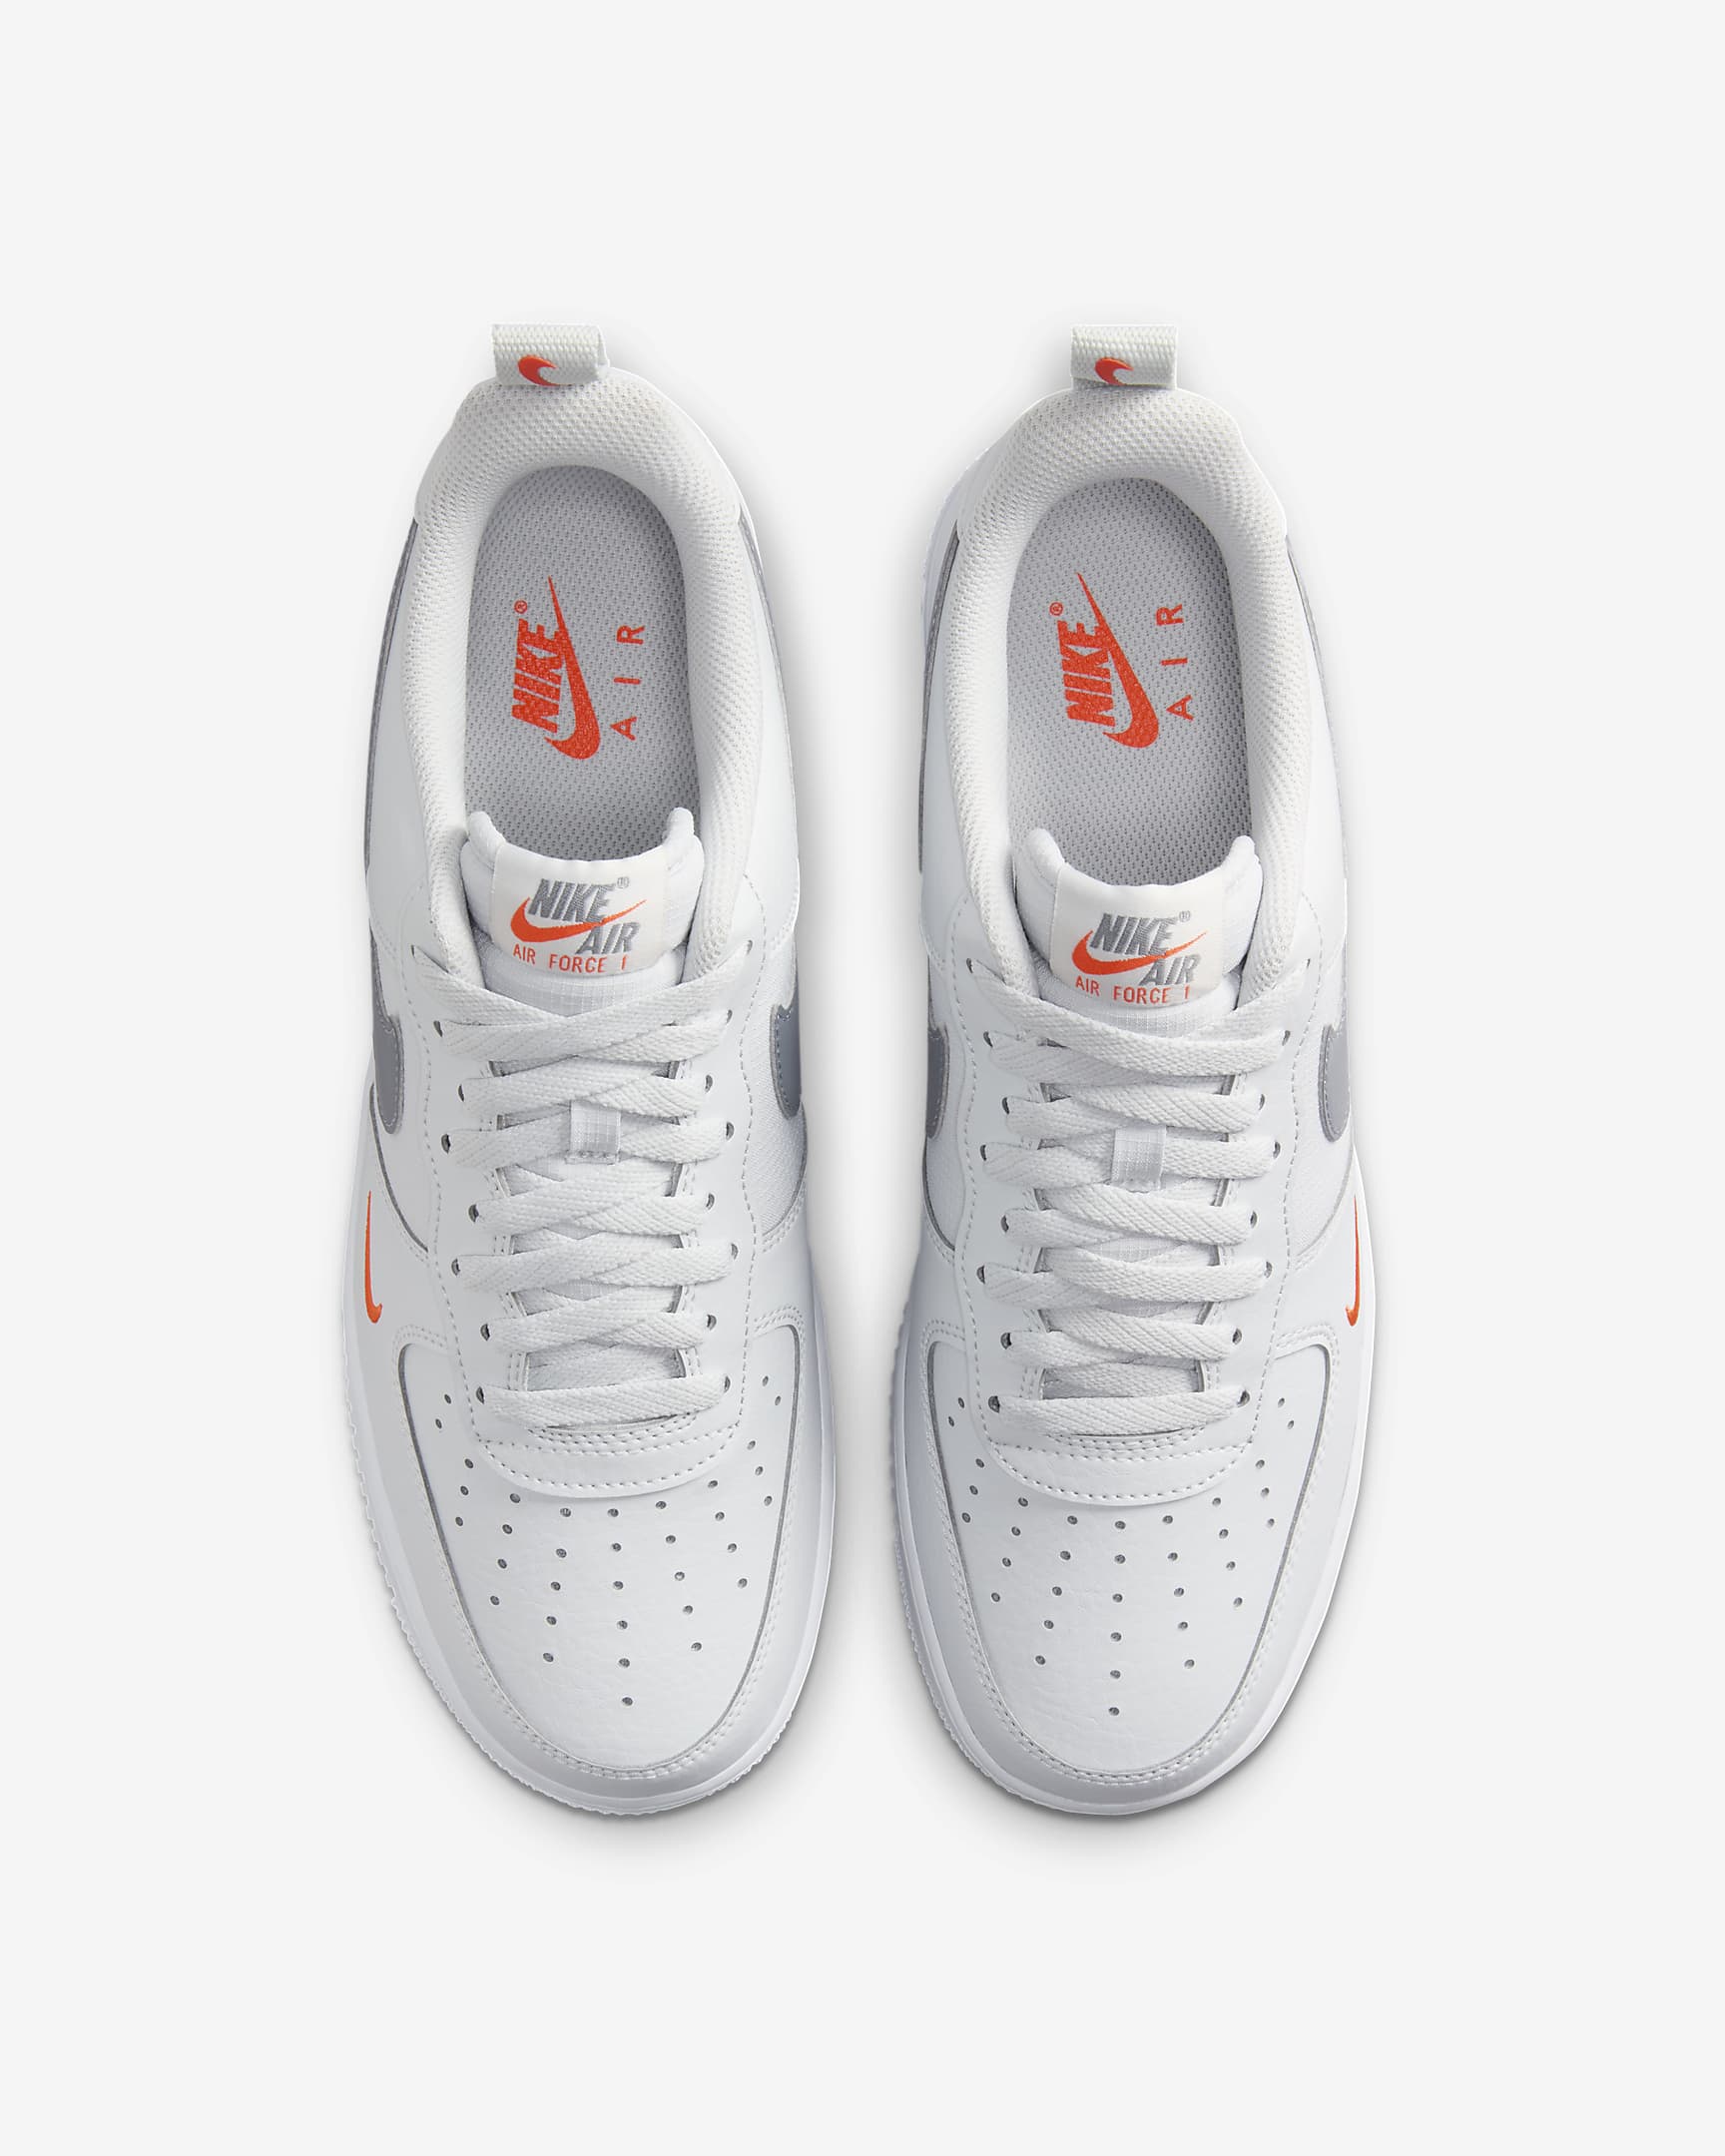 Nike Air Force 1 '07 Men's Shoes - Photon Dust/Safety Orange/White/Cool Grey